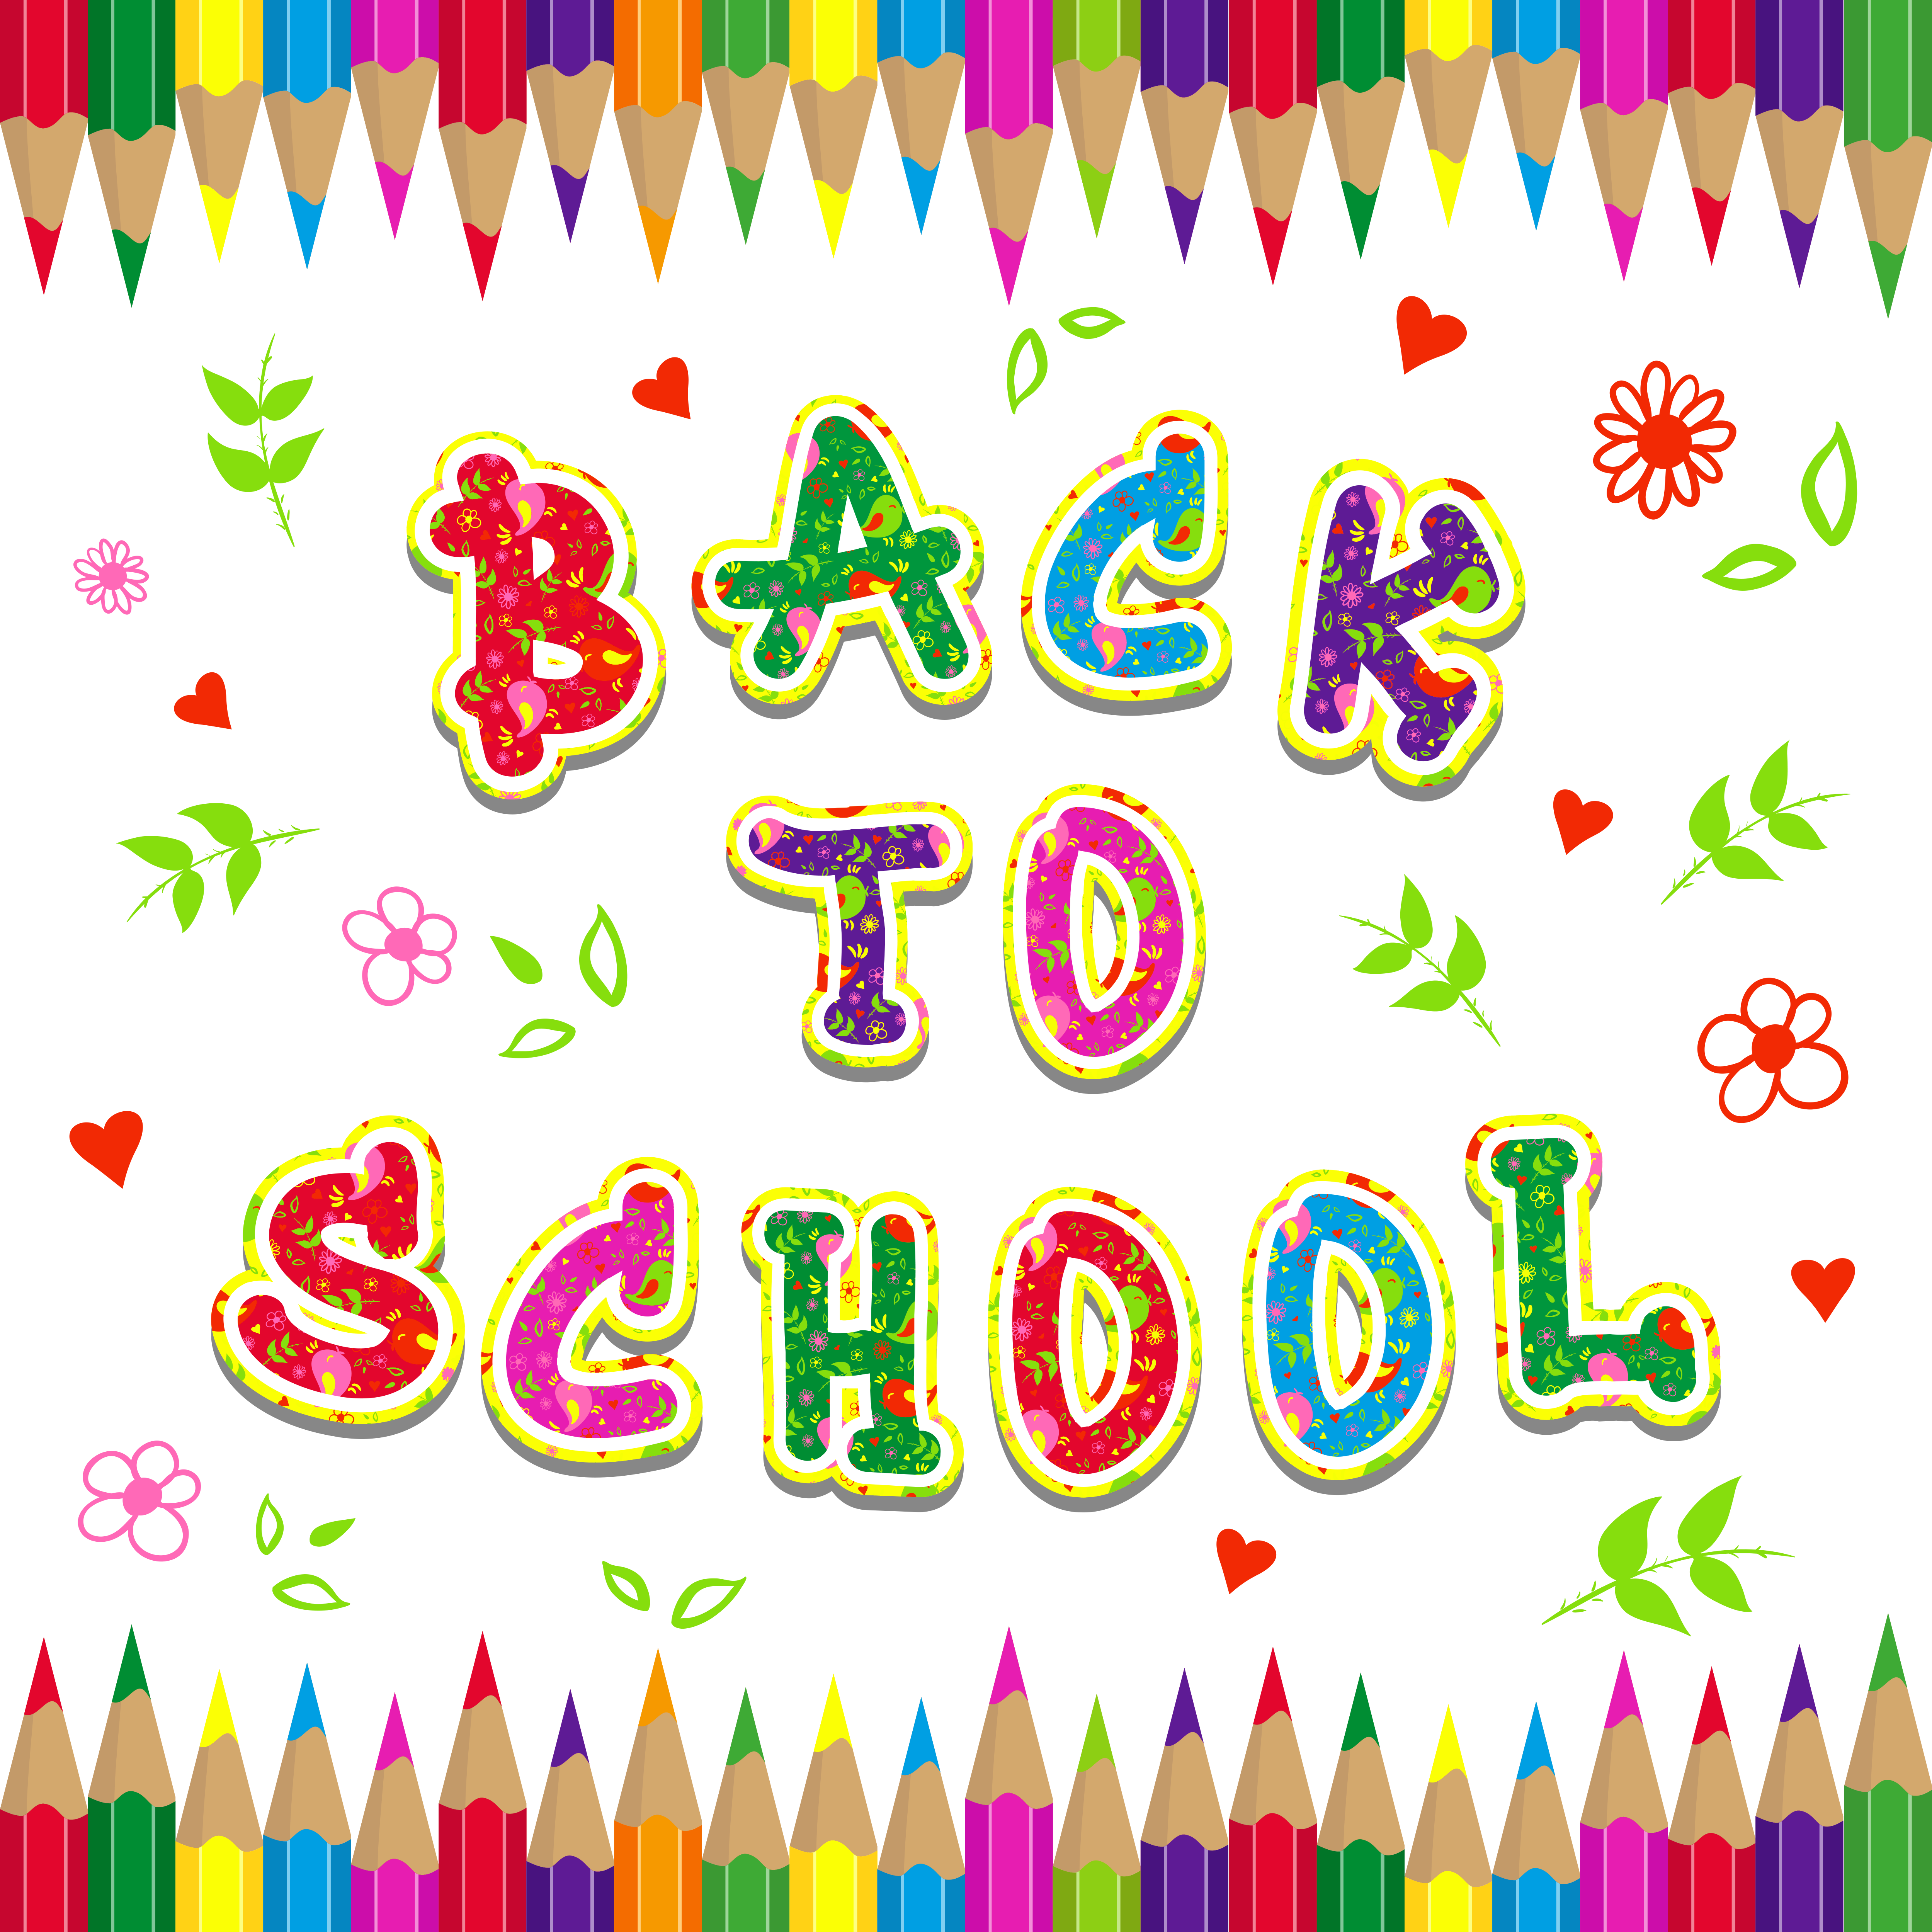 kind clipart back to school